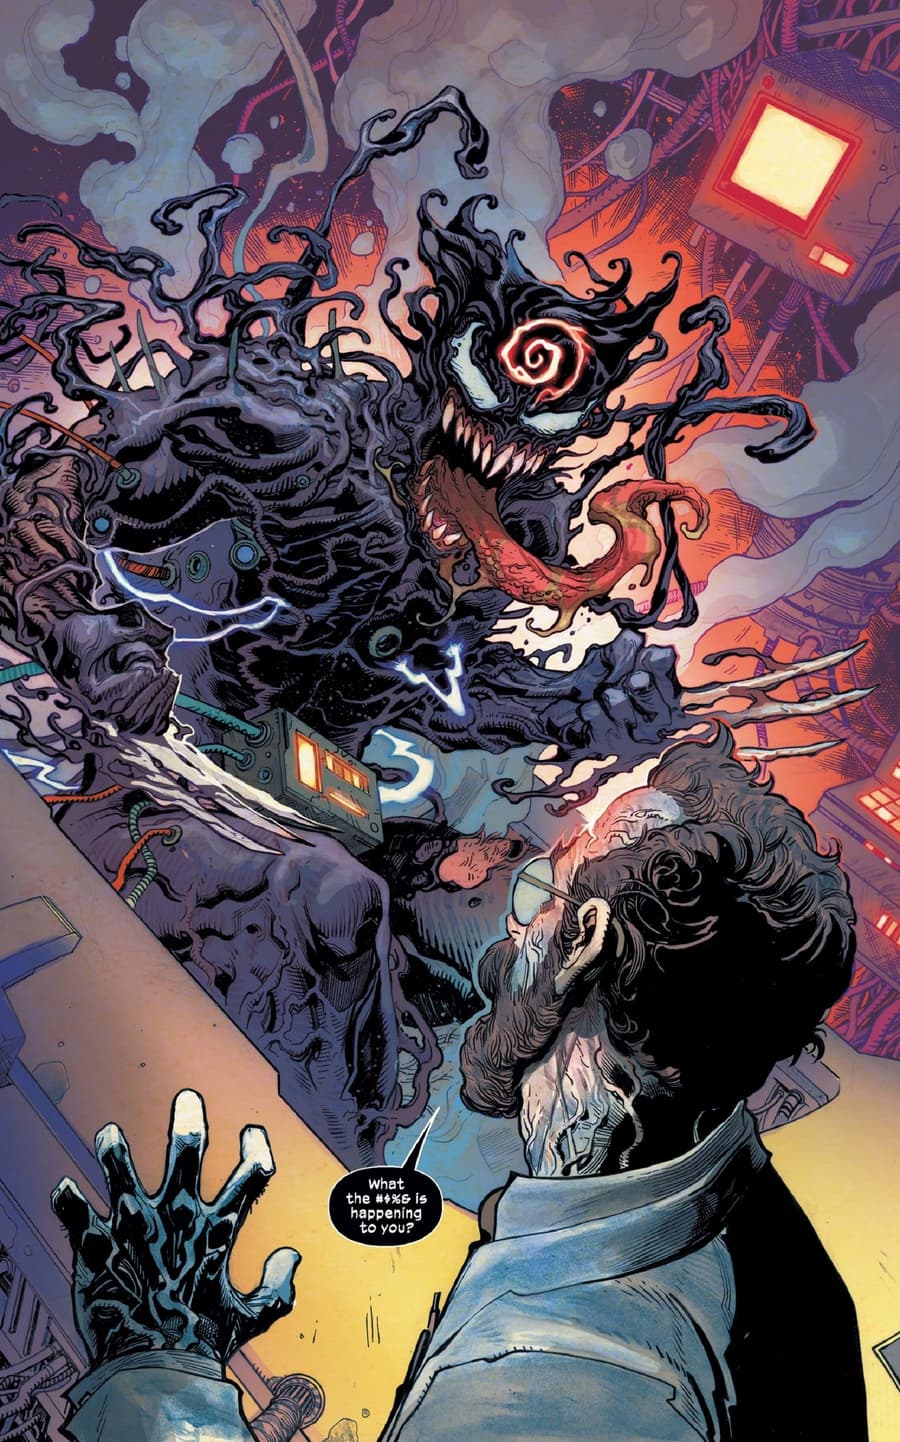 Wolverine gets overtaken by a symbiote!